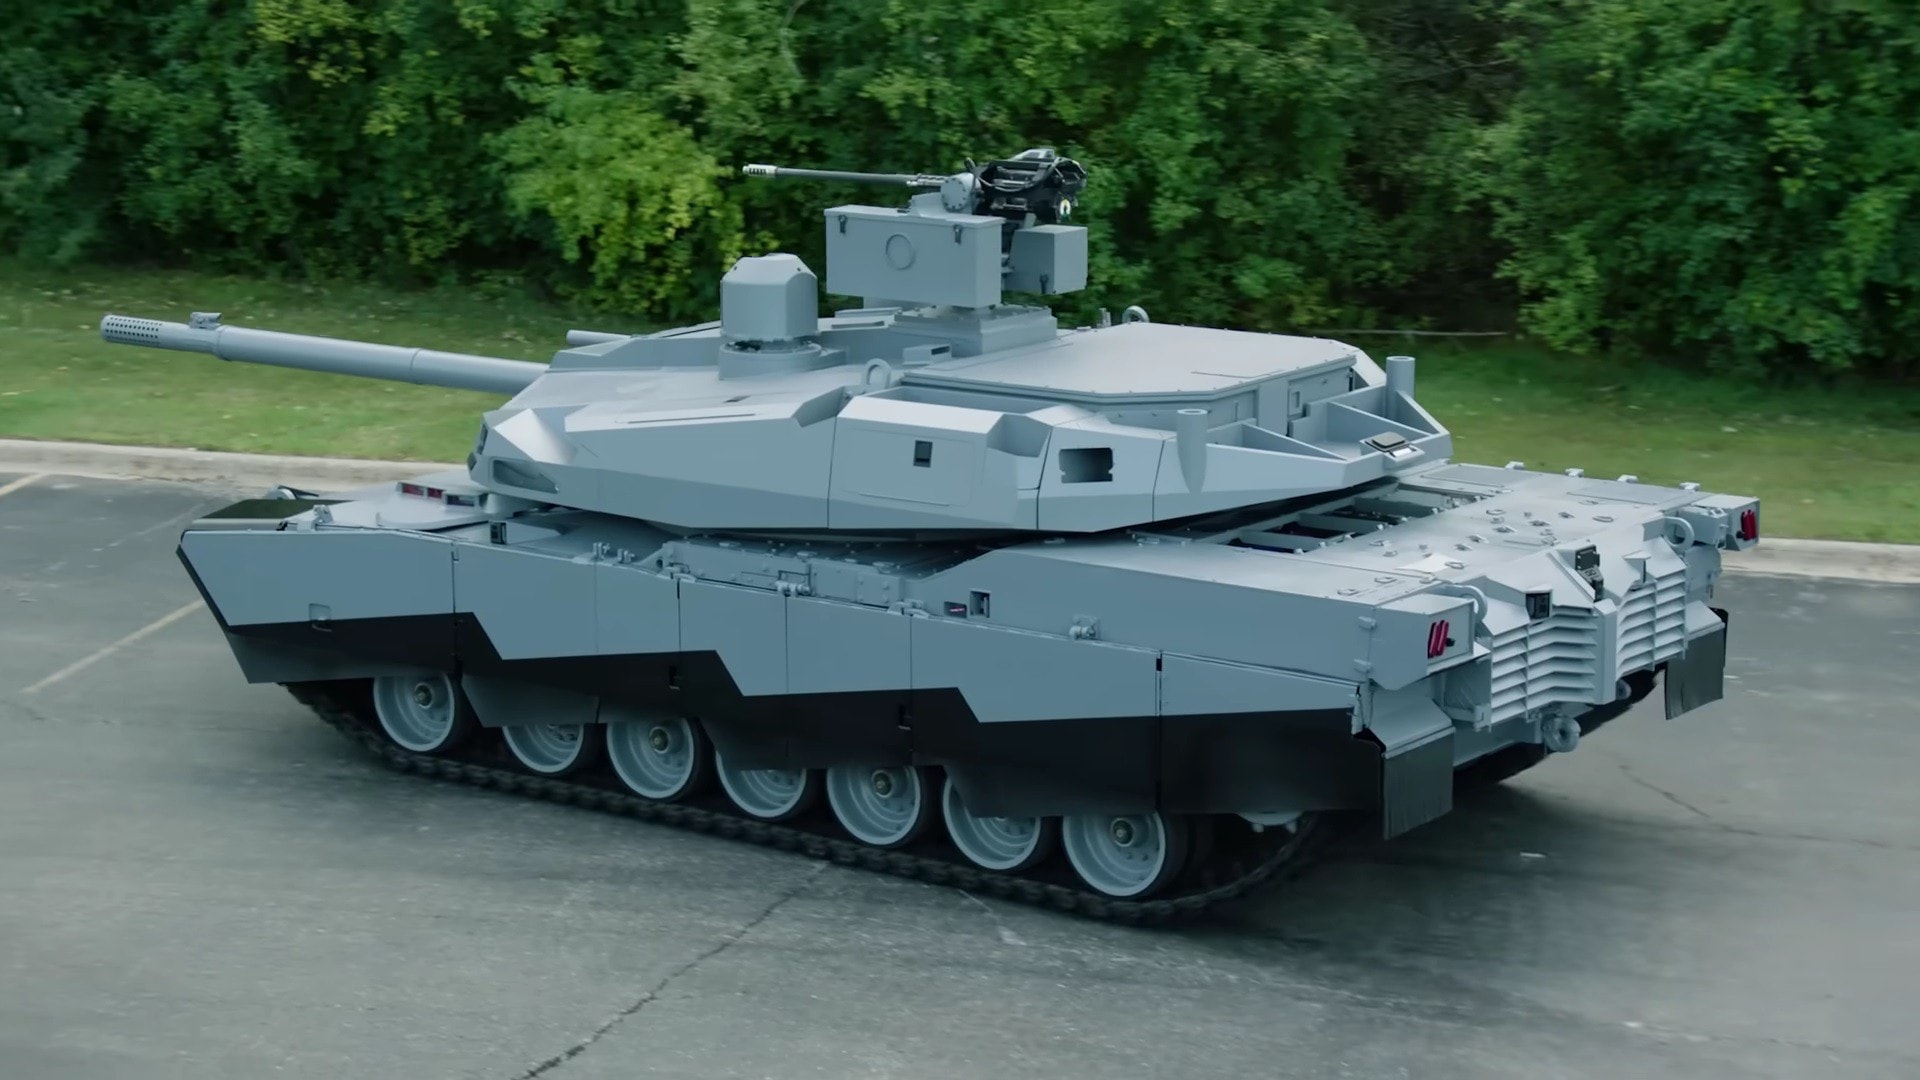 Abrams X Emerges As the Tank of the Future, YouTube Video Shows It